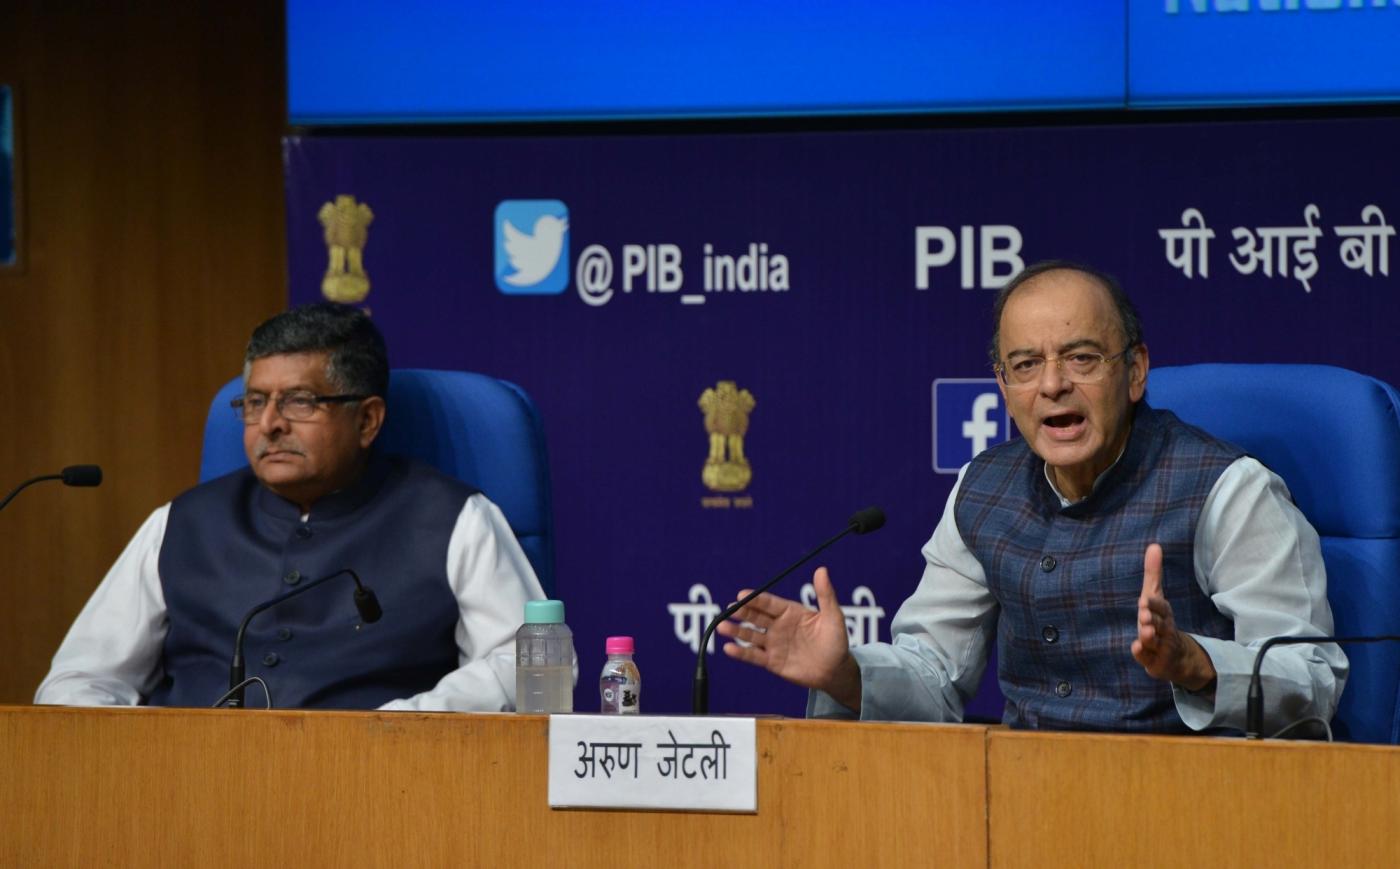 New Delhi: Union Finance and Corporate Affairs Minister Arun Jaitley addresses during a press conference after a cabinet briefing, along with Union Electronics and Information Technology and Law and Justice Minister Ravi Shankar Prasad in New Delhi, on Oct 24, 2018. Government on Wednesday rejected as "rubbish" opposition allegations that CBI Director Alok Verma was removed because he was going to order a probe into the charges in the Rafale deal " and said the step was taken on the recommendation of the CVC to maintain the institutional integrity of the probe agency. (Photo: IANS) by .